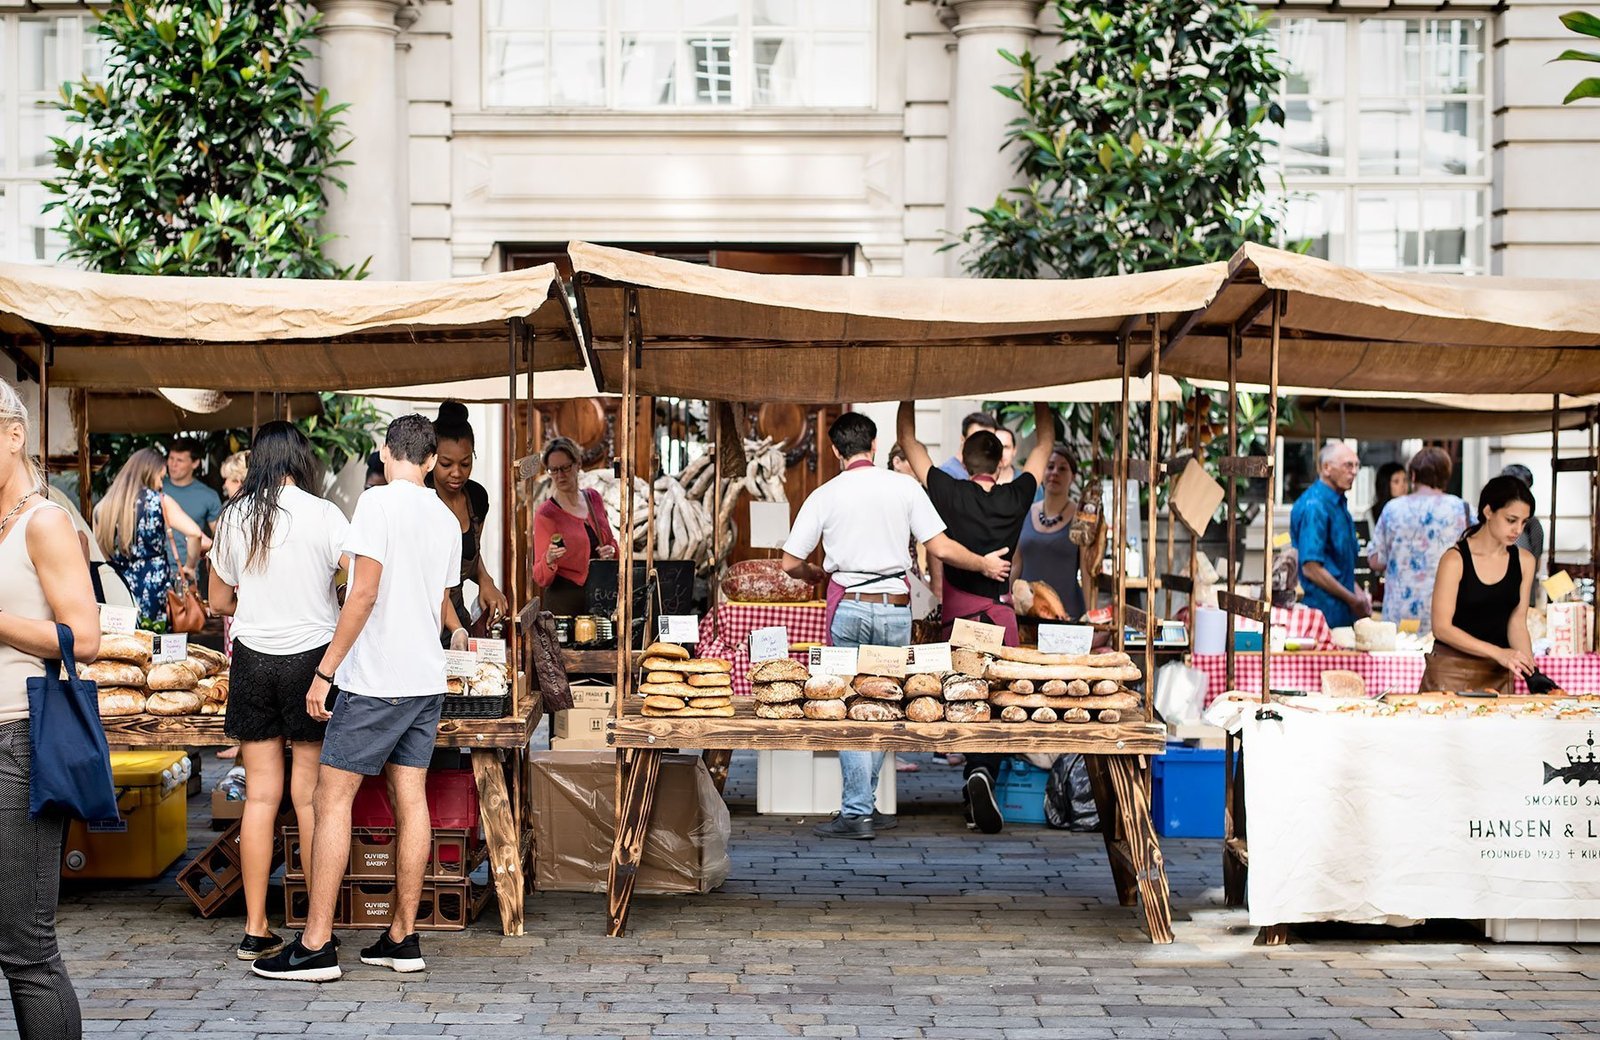 The Slow Food & Living Market in the inner courtyard of the Rosewood London hotel in Holborn. 